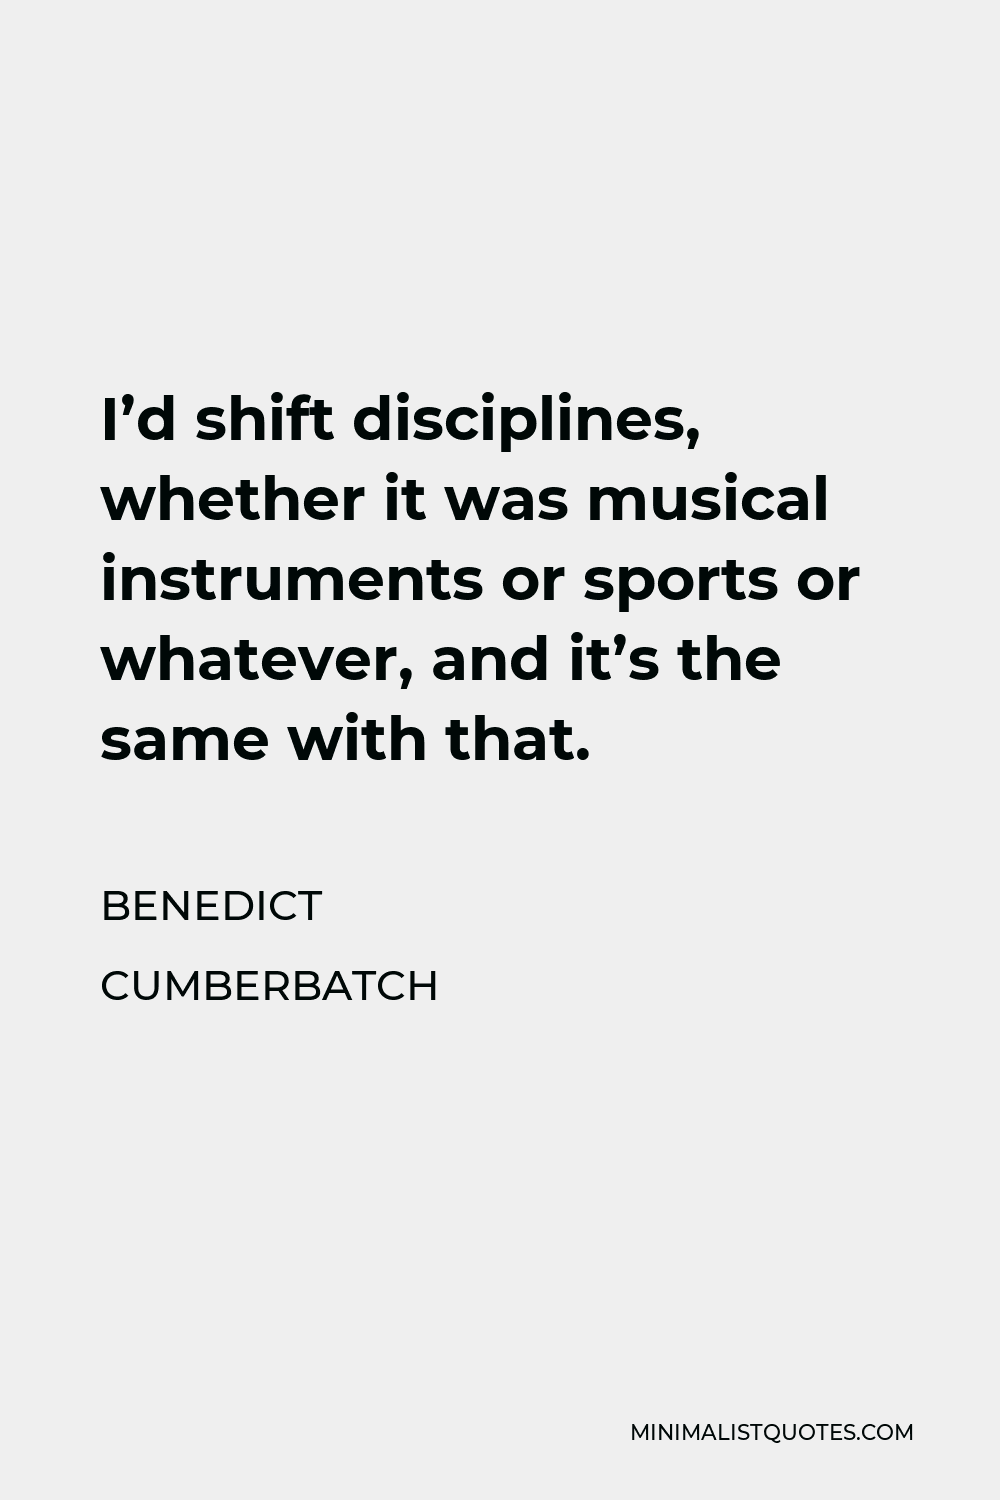 Benedict Cumberbatch Quote - I’d shift disciplines, whether it was musical instruments or sports or whatever, and it’s the same with that.